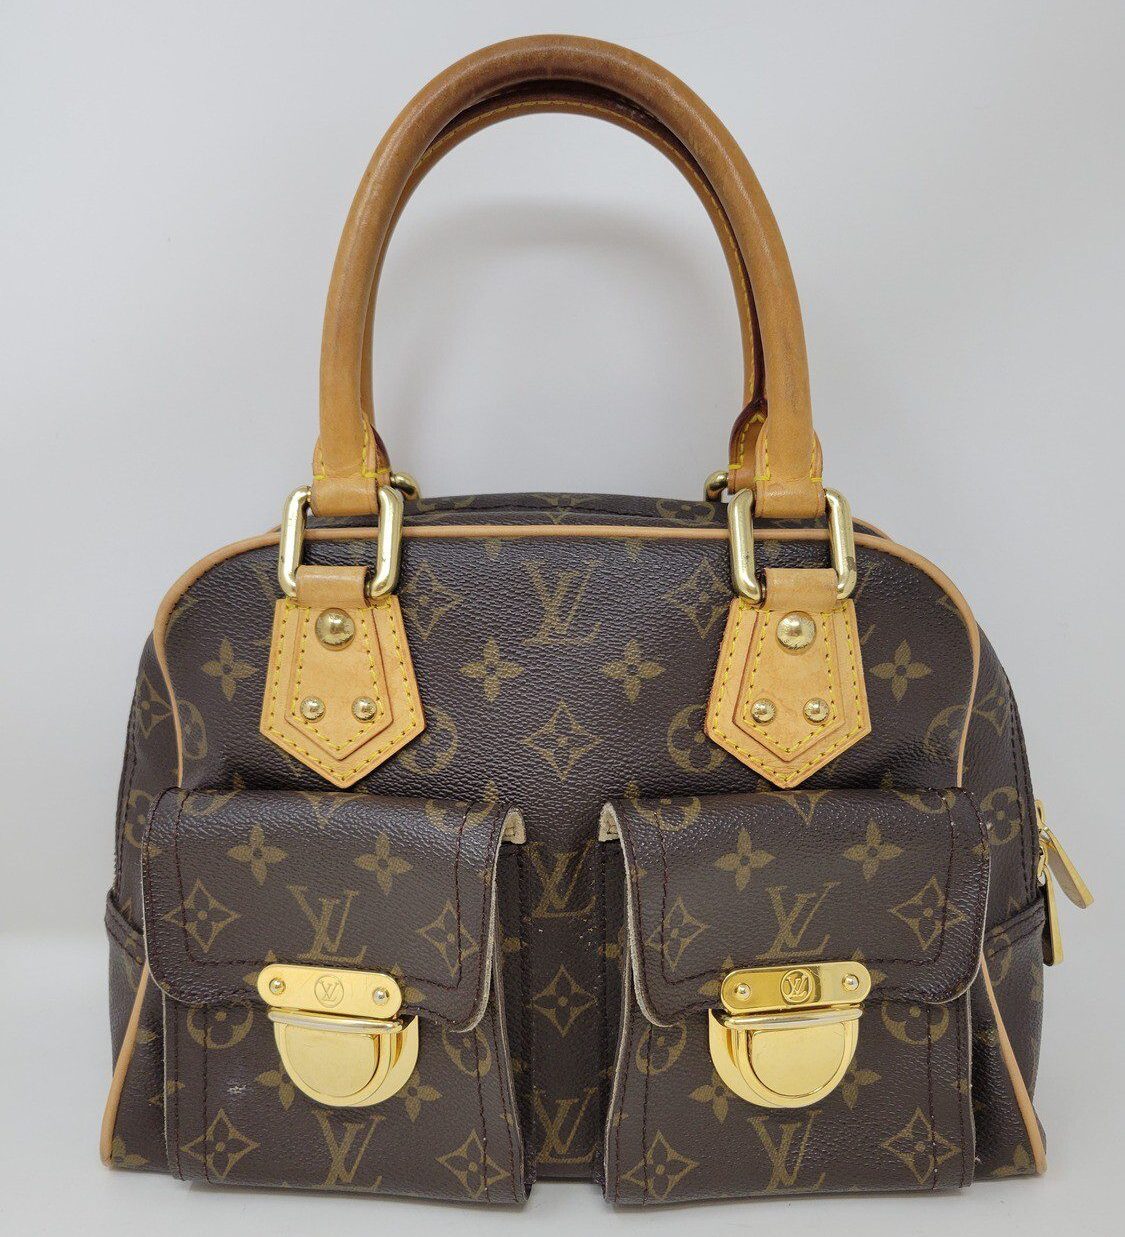 Louis Vuitton Handbags for sale in Indianapolis, Indiana, Facebook  Marketplace